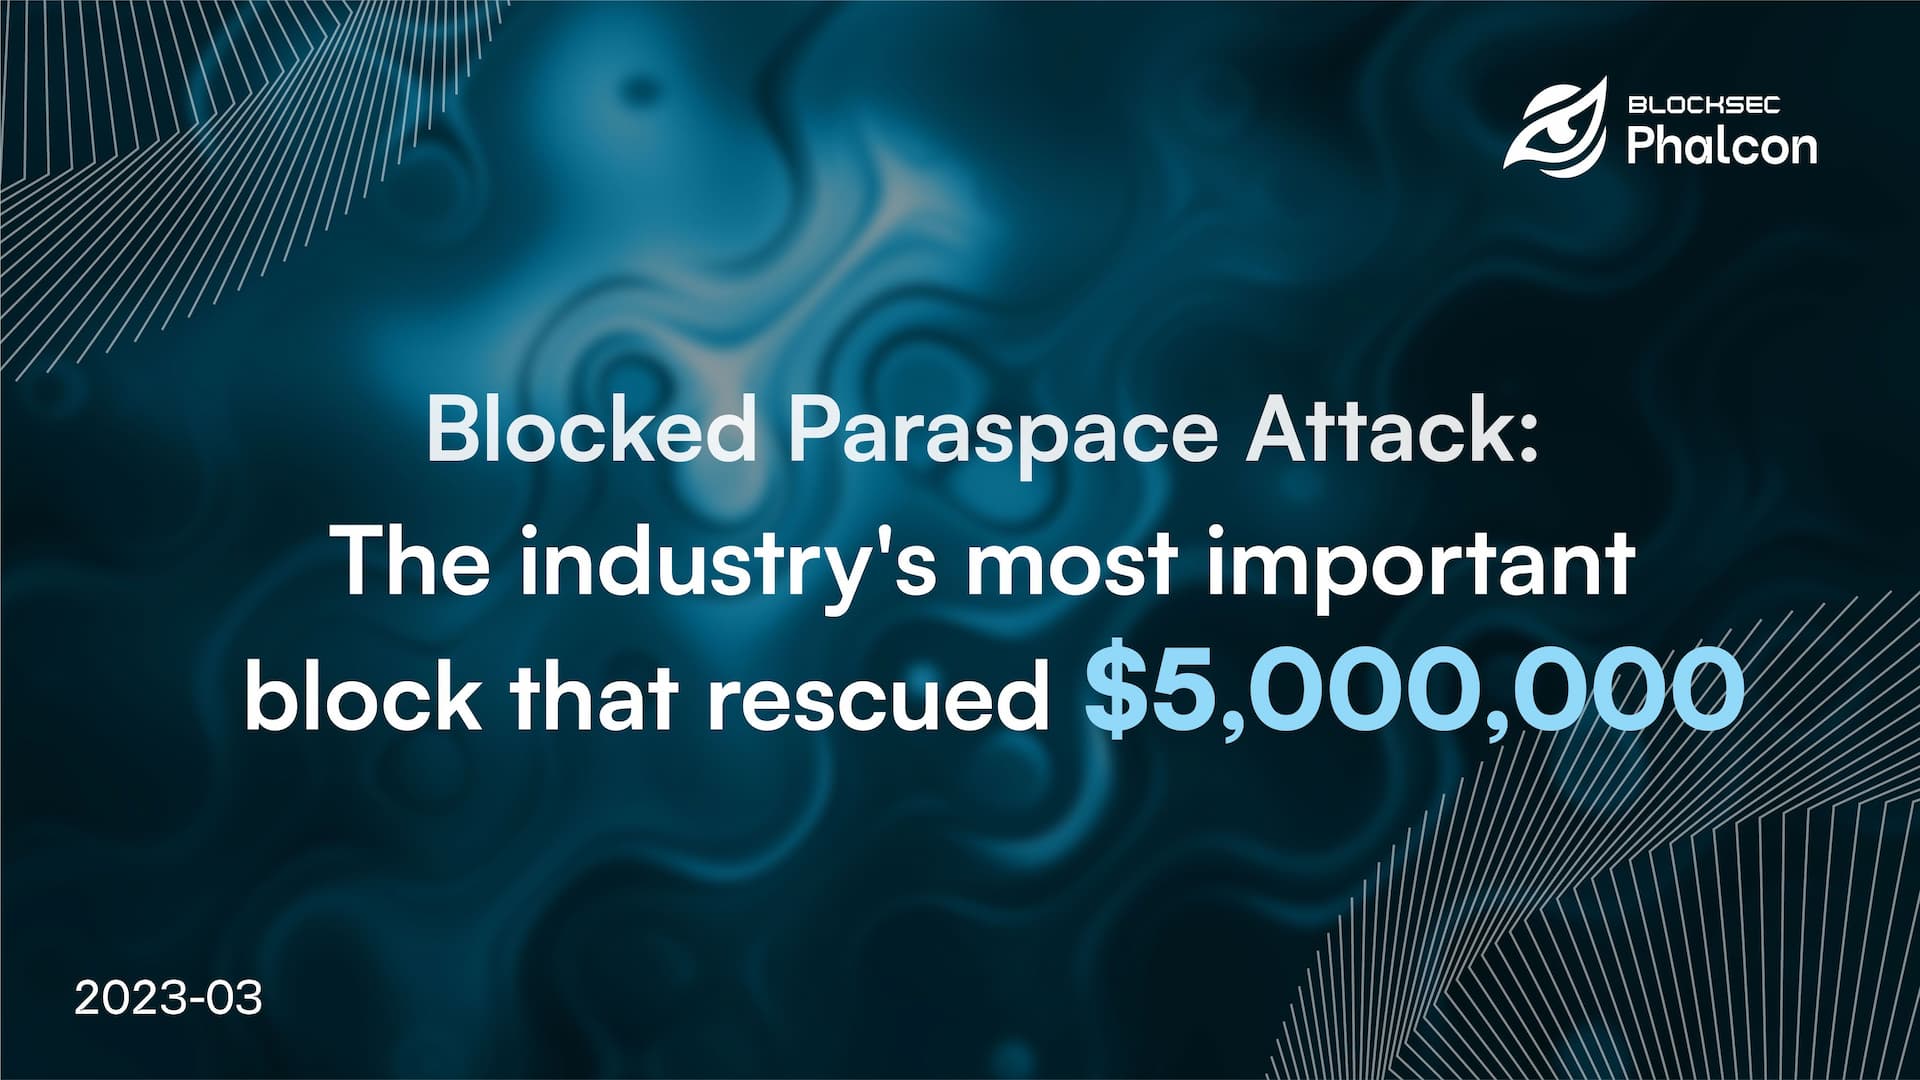 Blocked Paraspace Attack: Industry's Most Important Block that Rescued $5,000,000